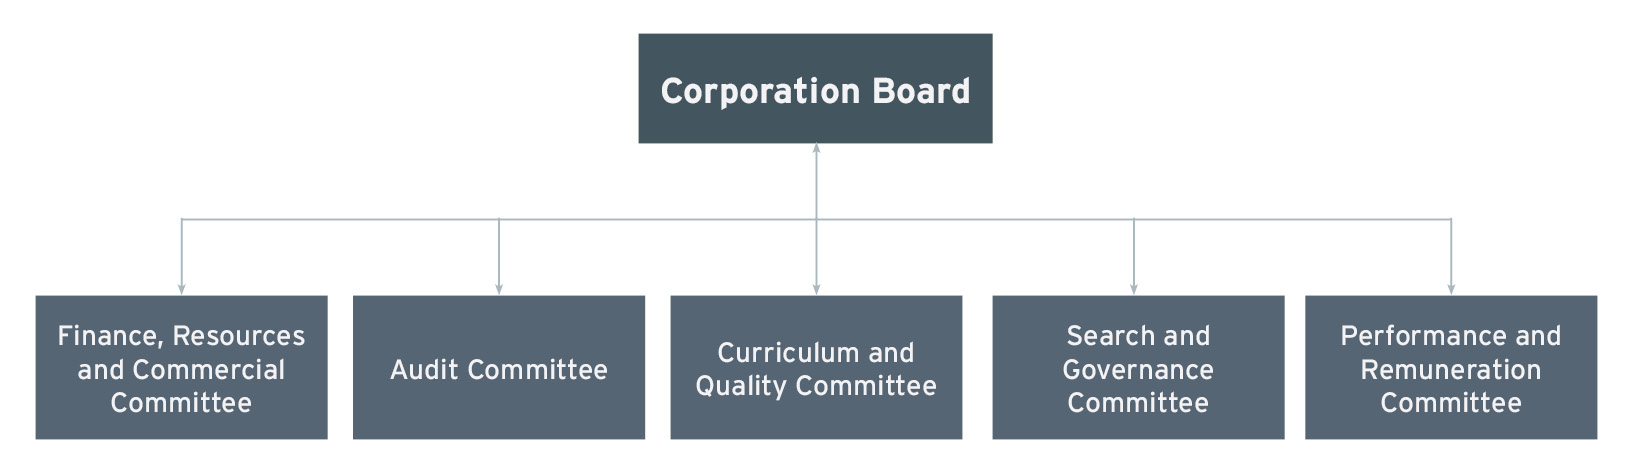 Organisation structural chart of our Corporation Board. The details are listed below in order.